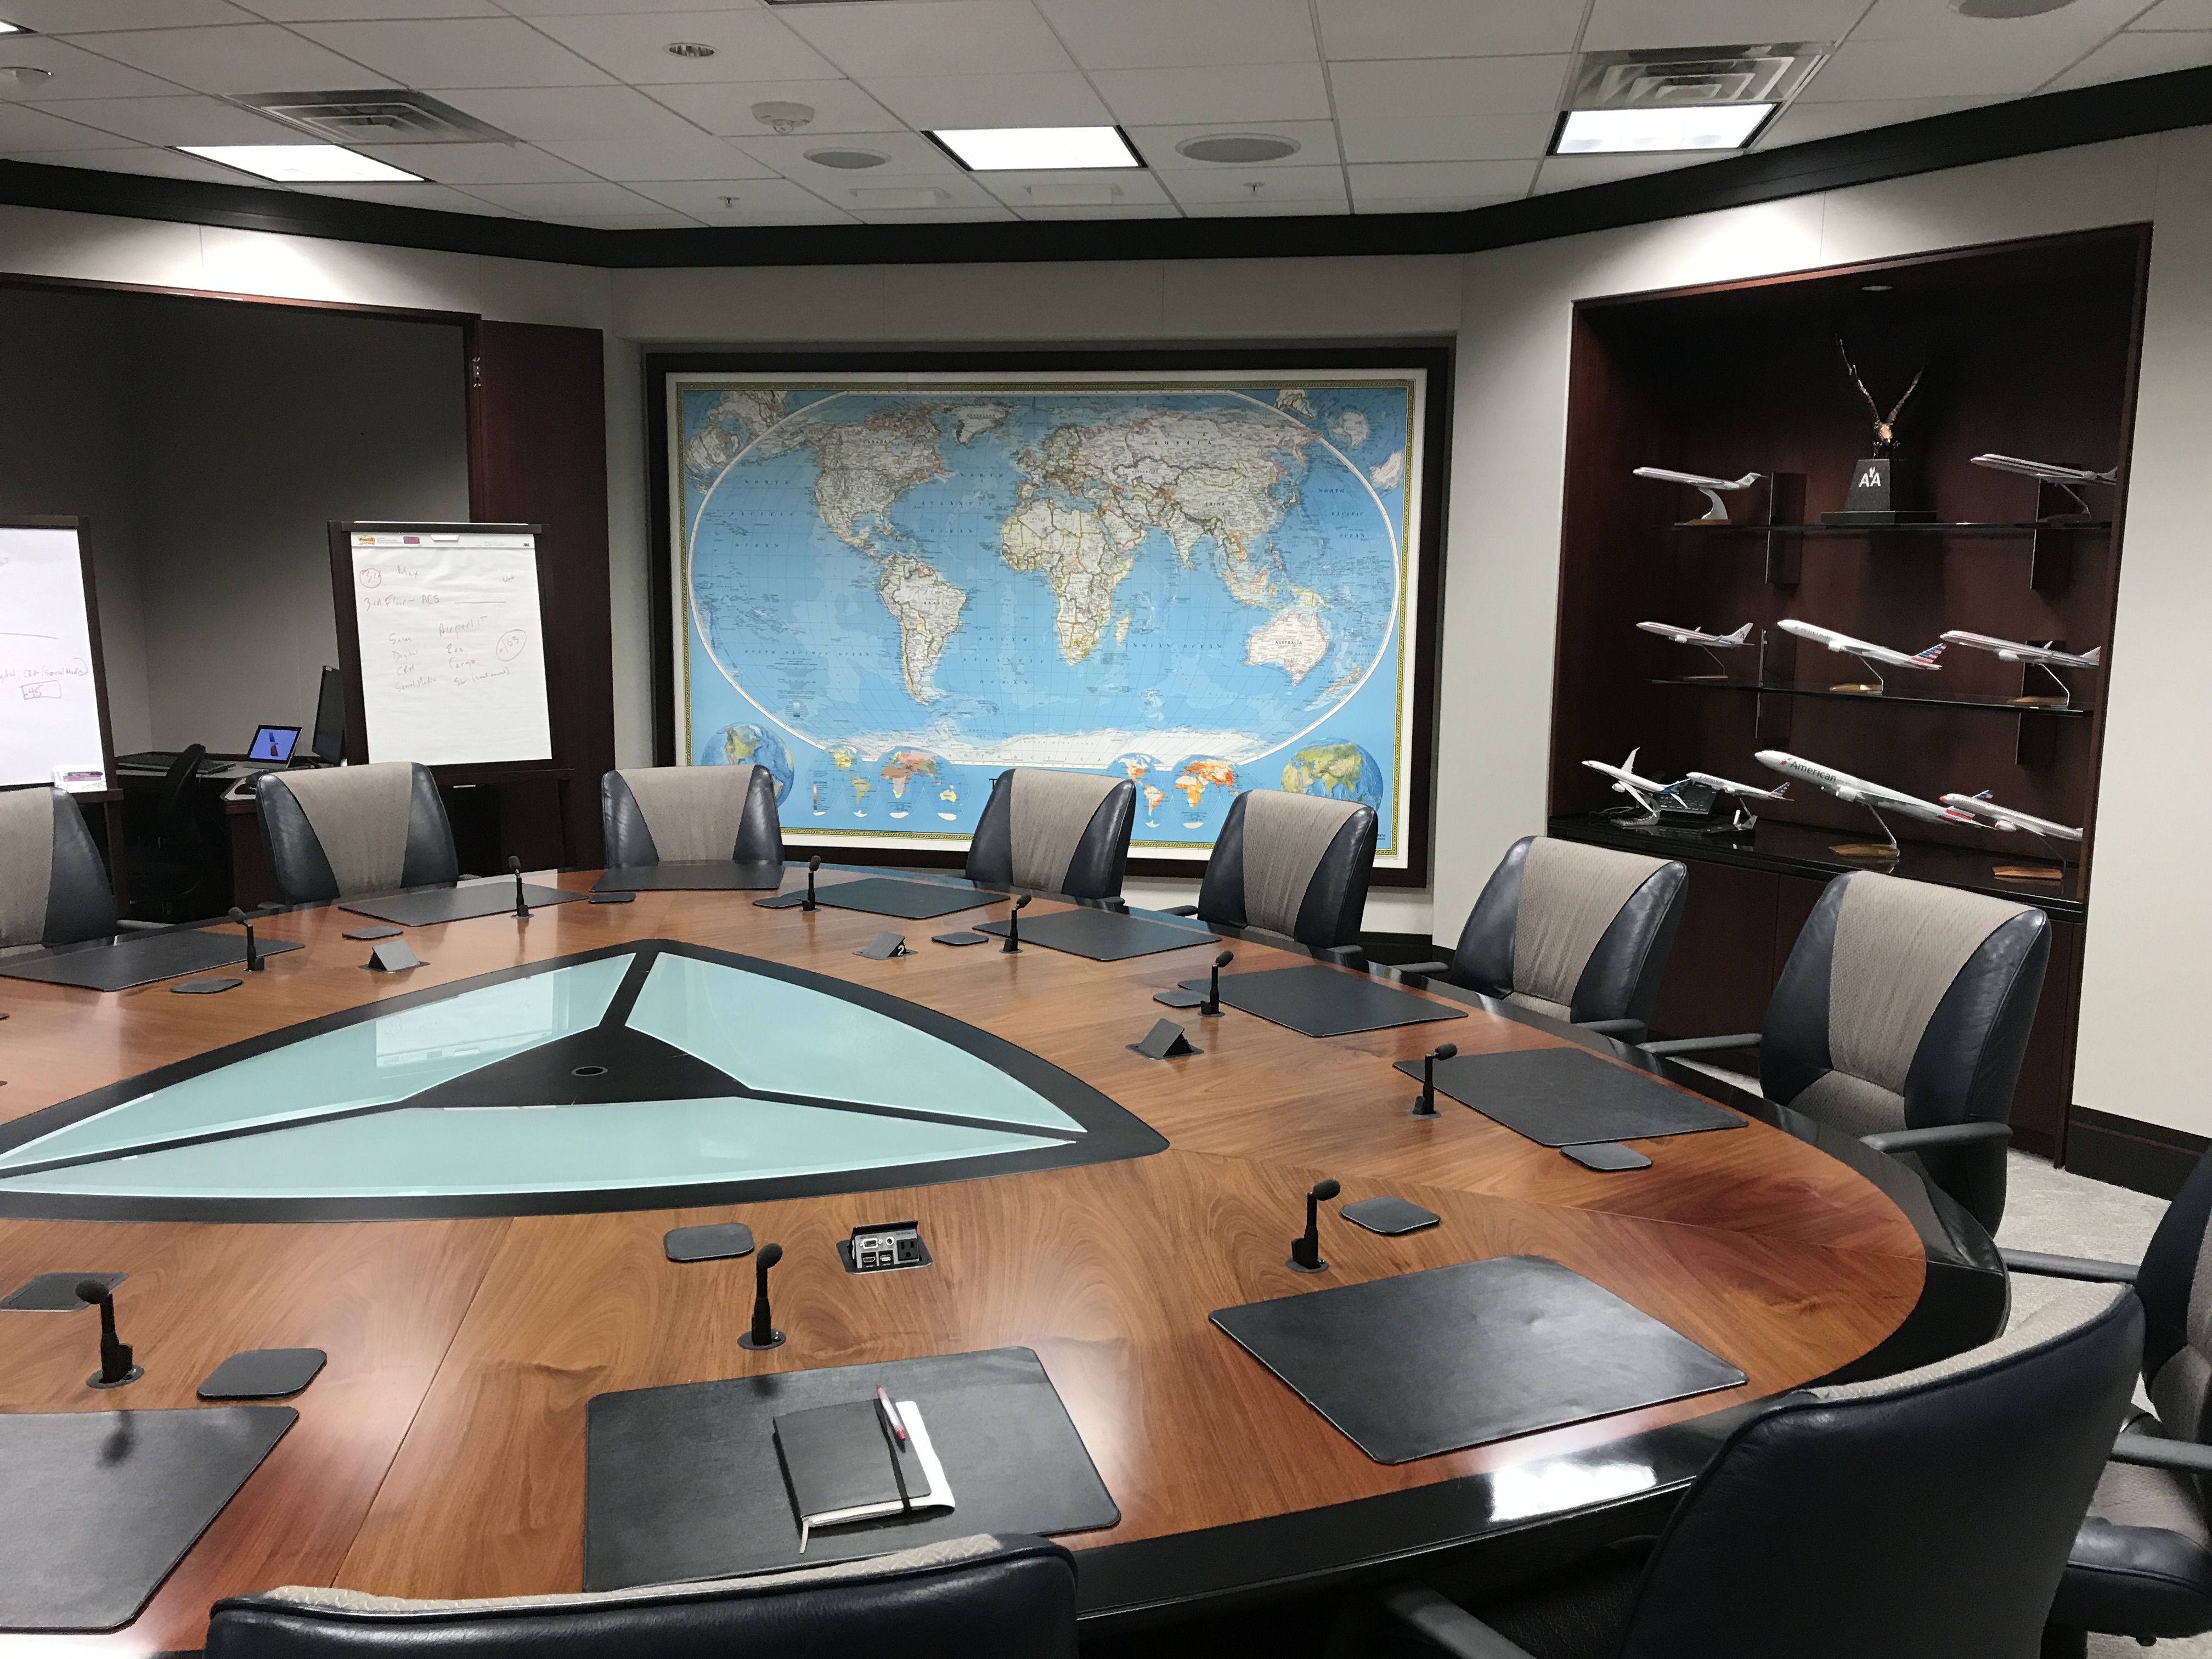 The American Airlines Executive Board Room